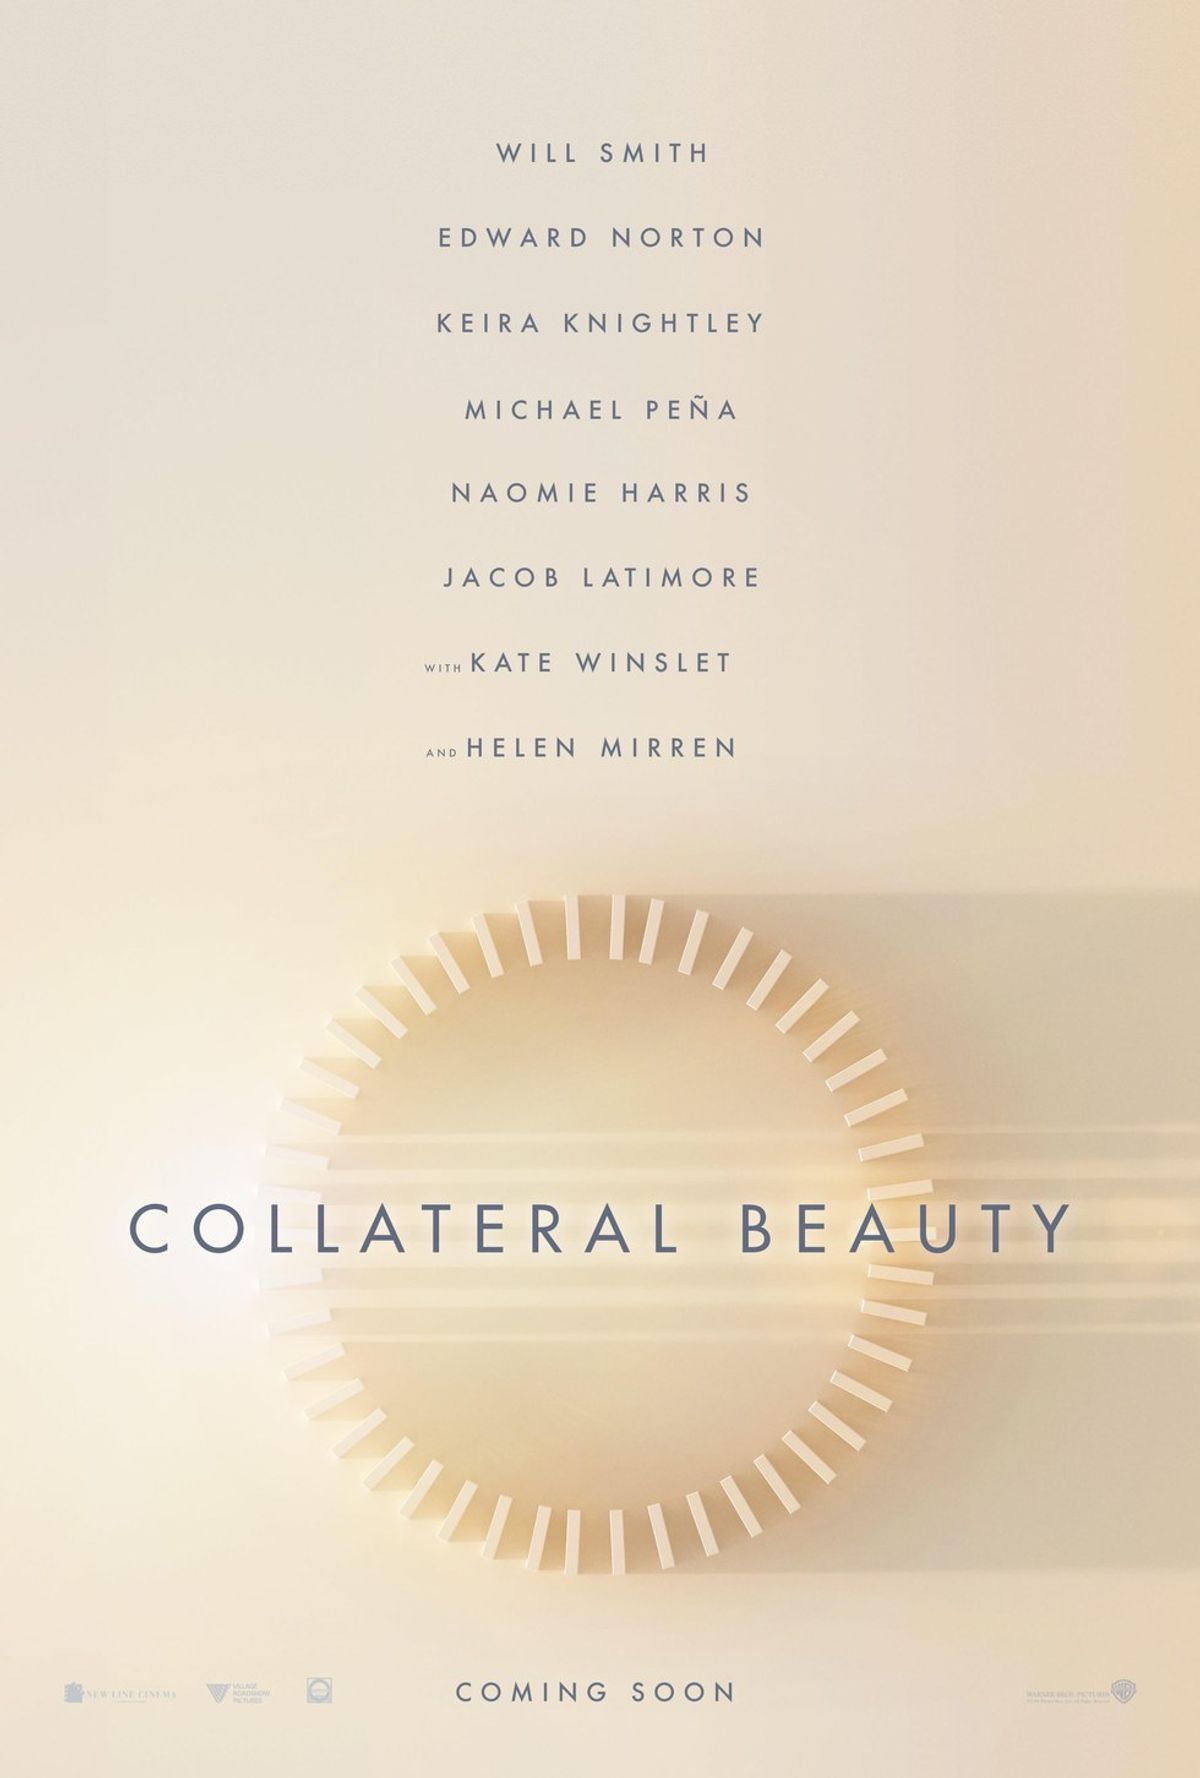 A Review Of "Collateral Beauty"